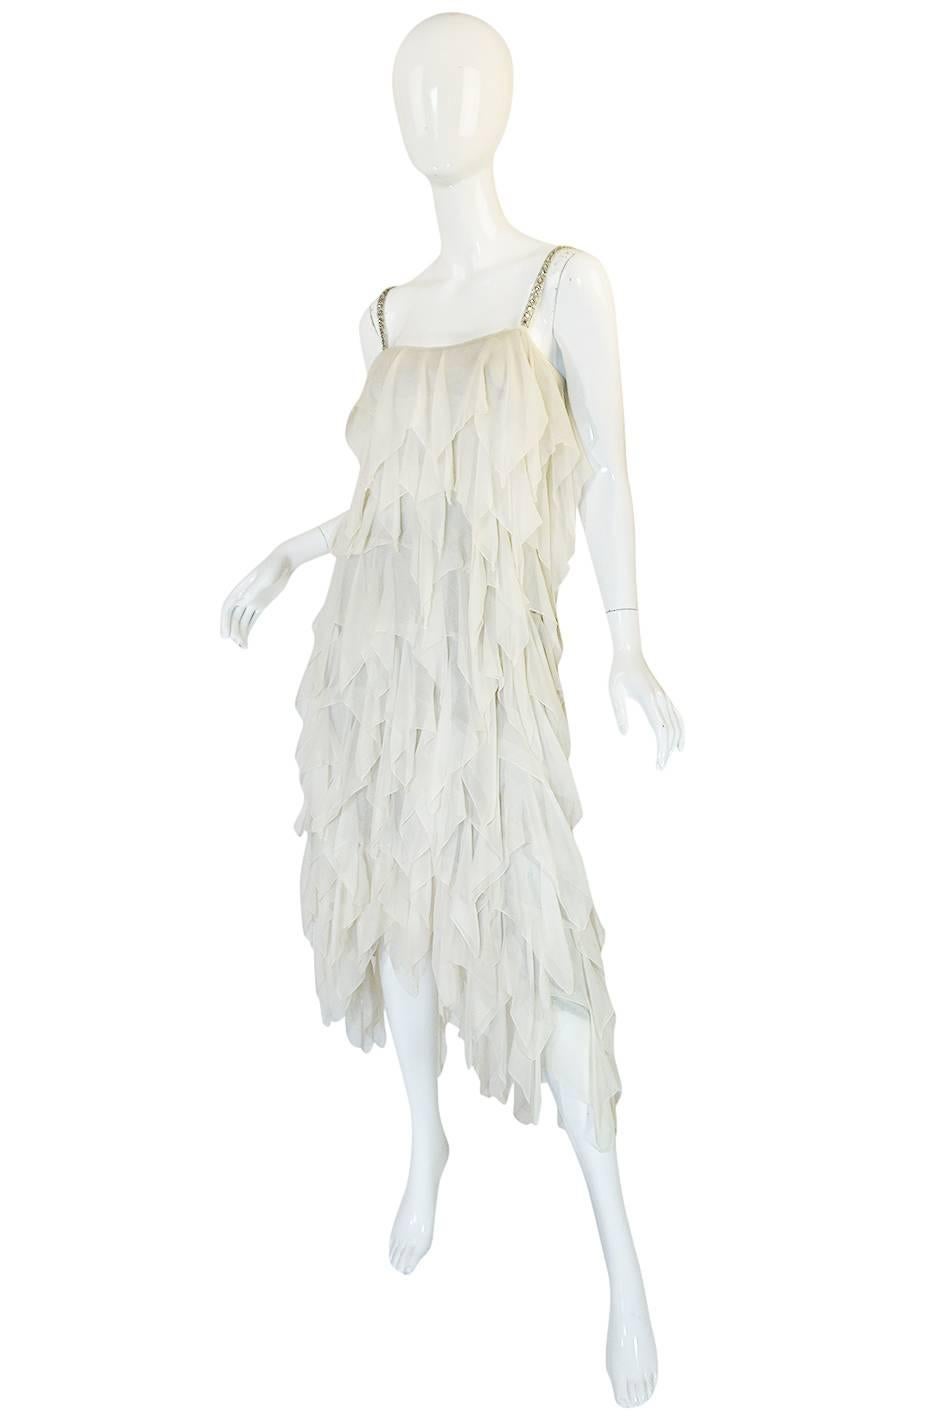 

This wonderful Stavropoulos dress is an absolute extravagance of silk chiffon tiers. It is made from layers and layers of a beautiful ivory silk chiffon crepe all stitched onto an underlay of a silver lame fabric so you get just the glimpse of